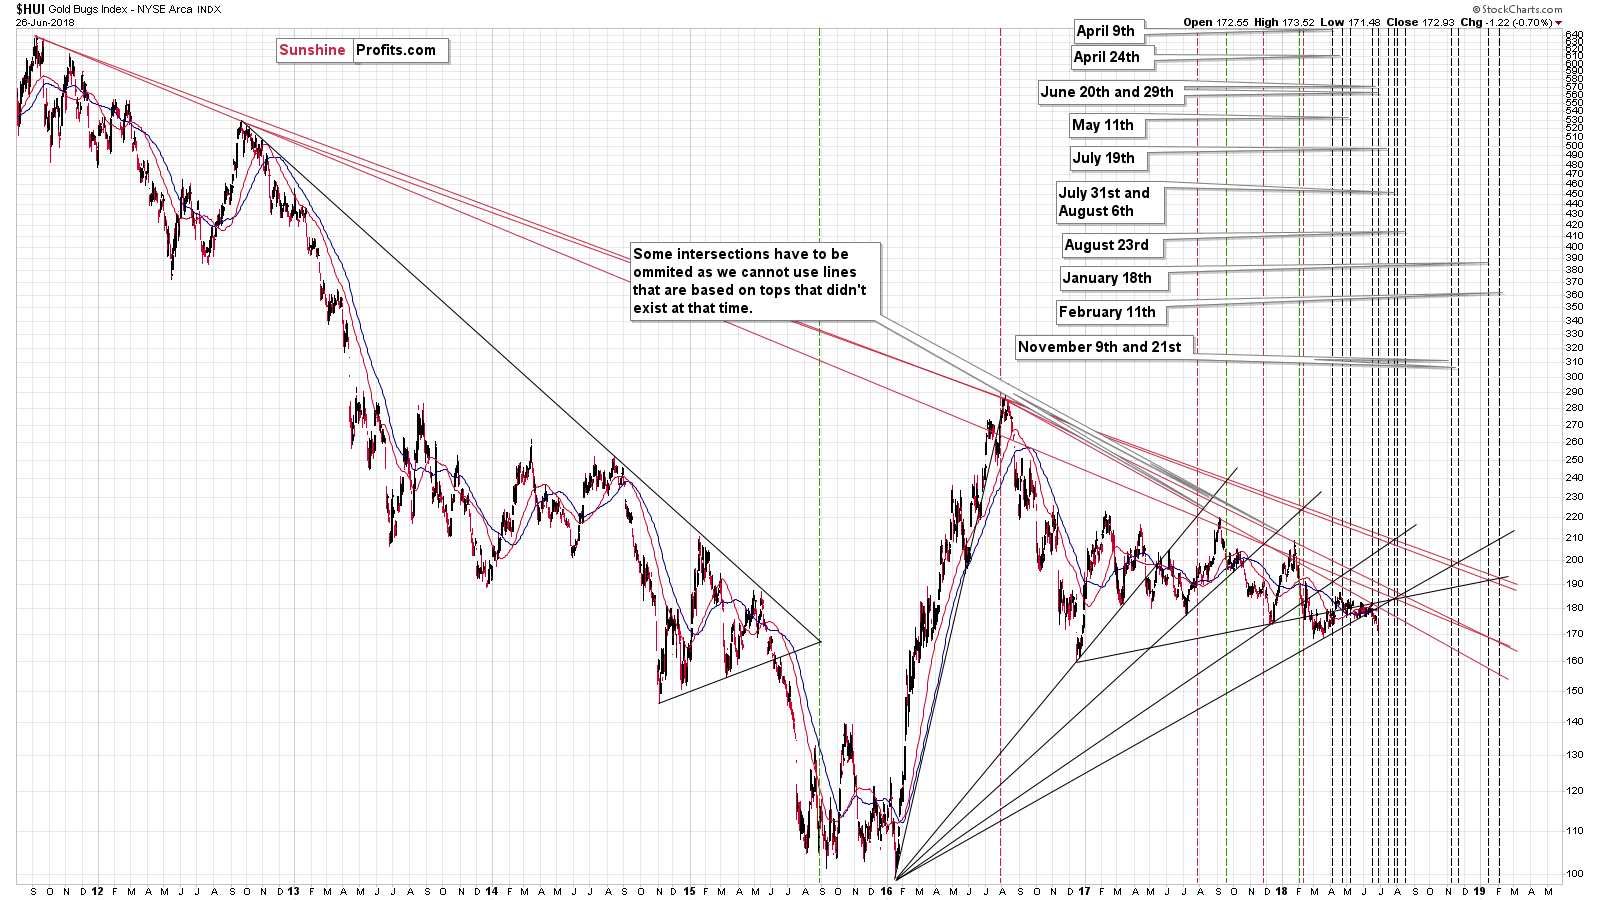 Gold Bugs Index